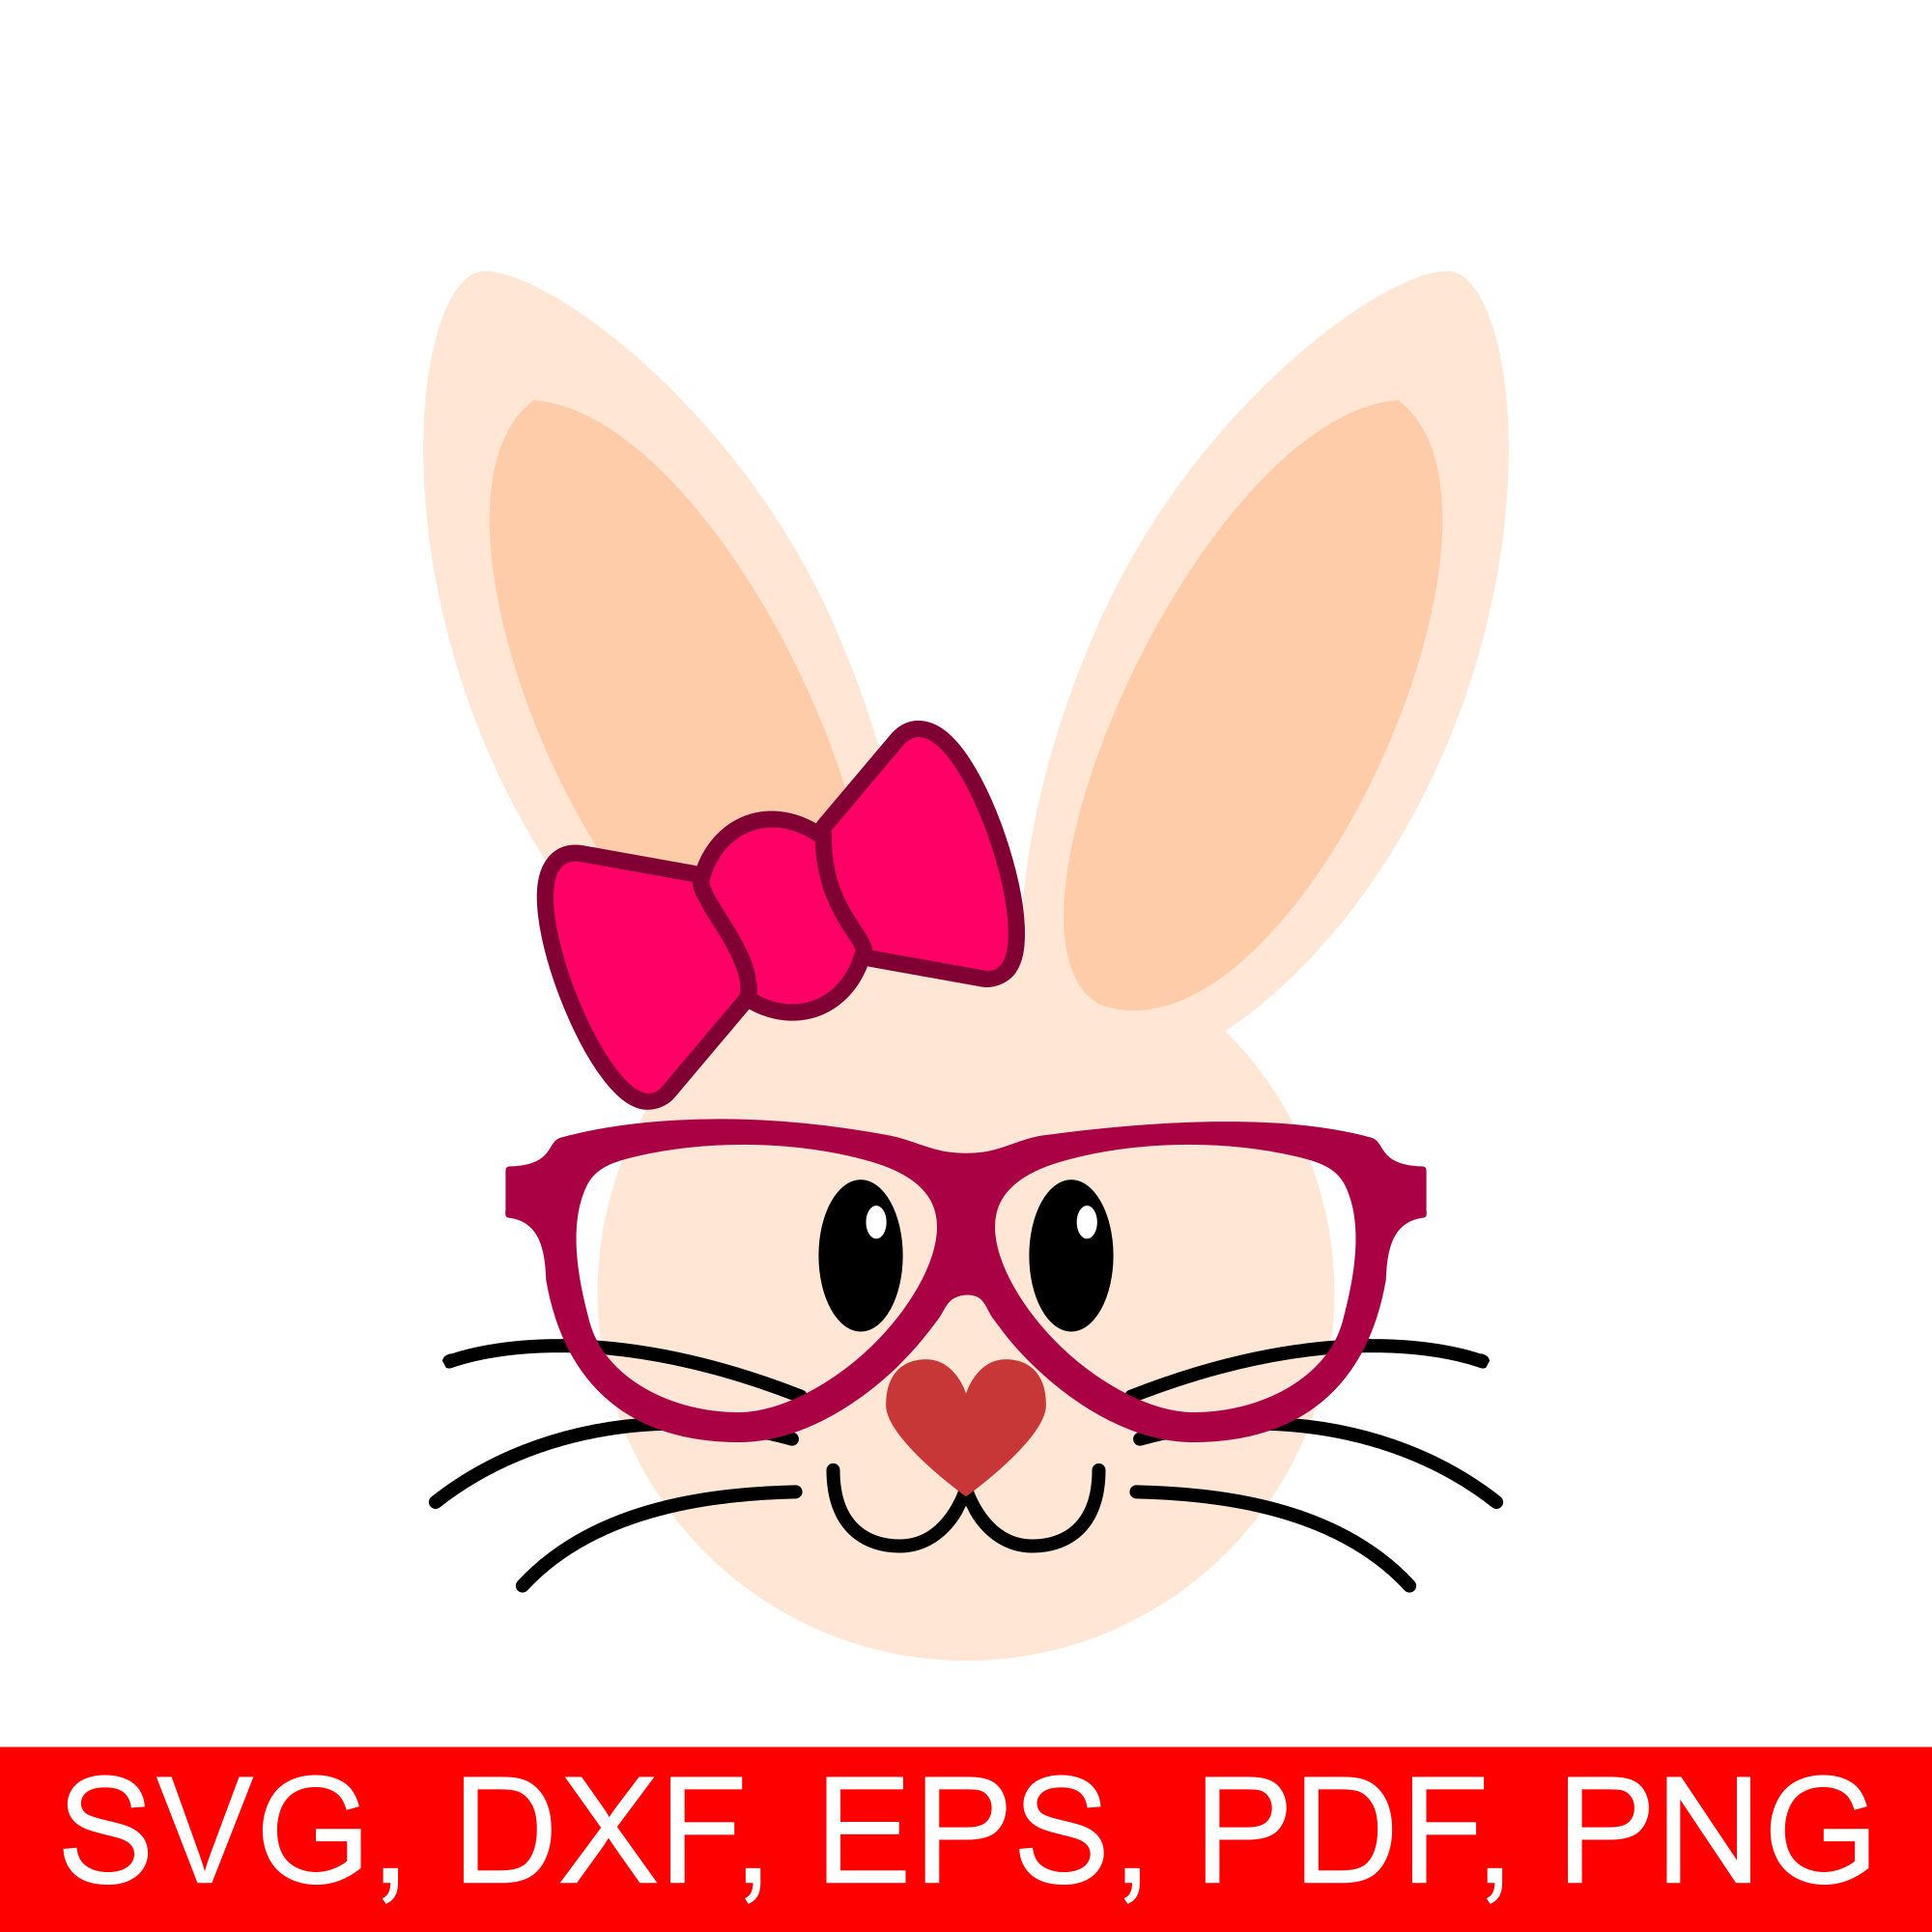 Miss easter bunny svg. Bunnies clipart hipster